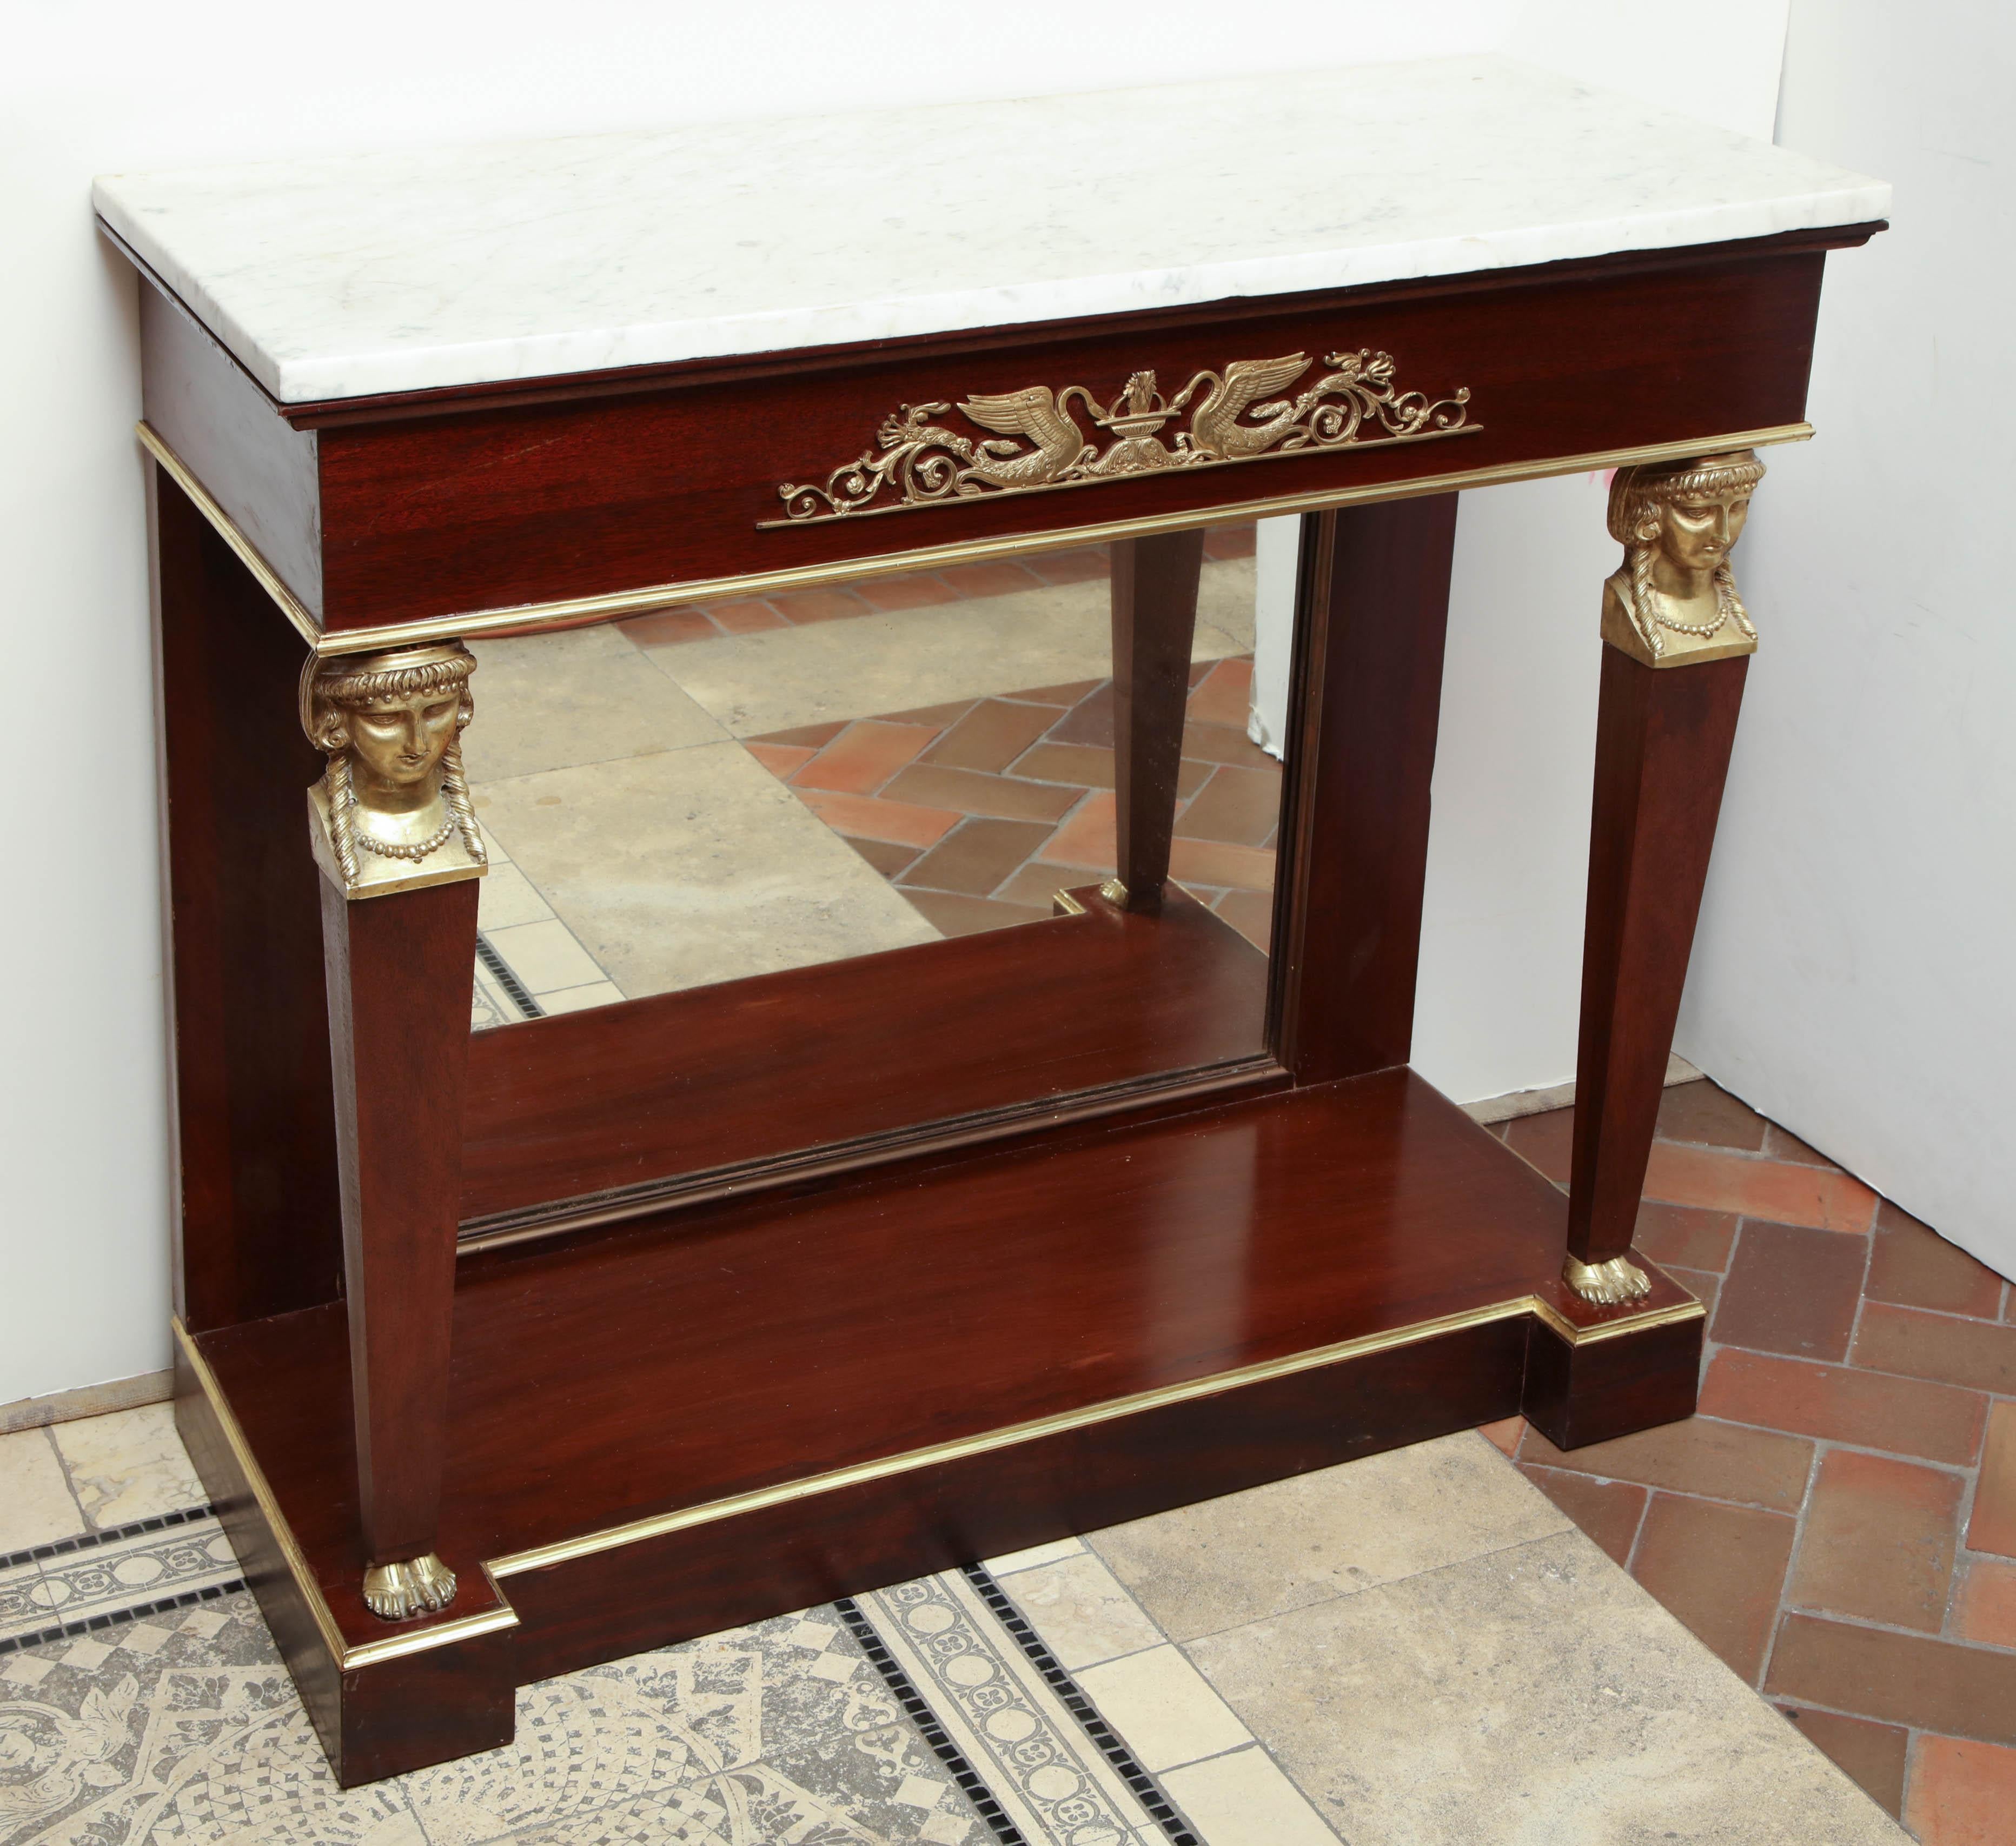 French Empire marble-top mahogany console table with bronze mounts, capital, a mirror back on a shelf stretcher n base.